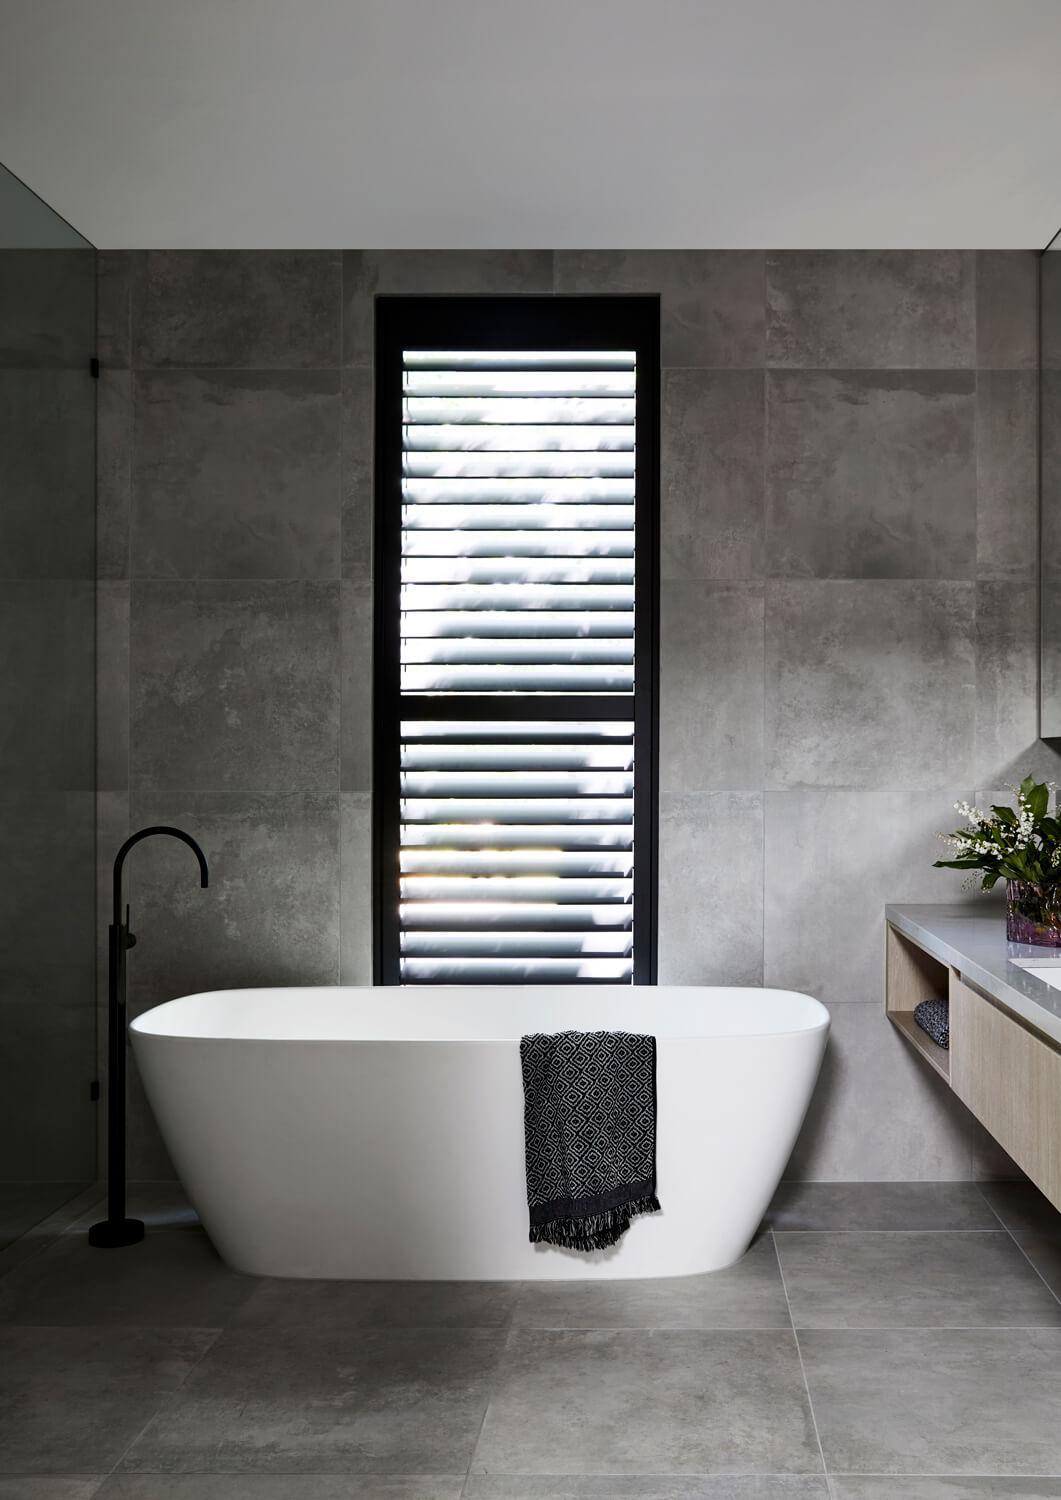 Freestanding Tub With Black Fittings And Window Shutters